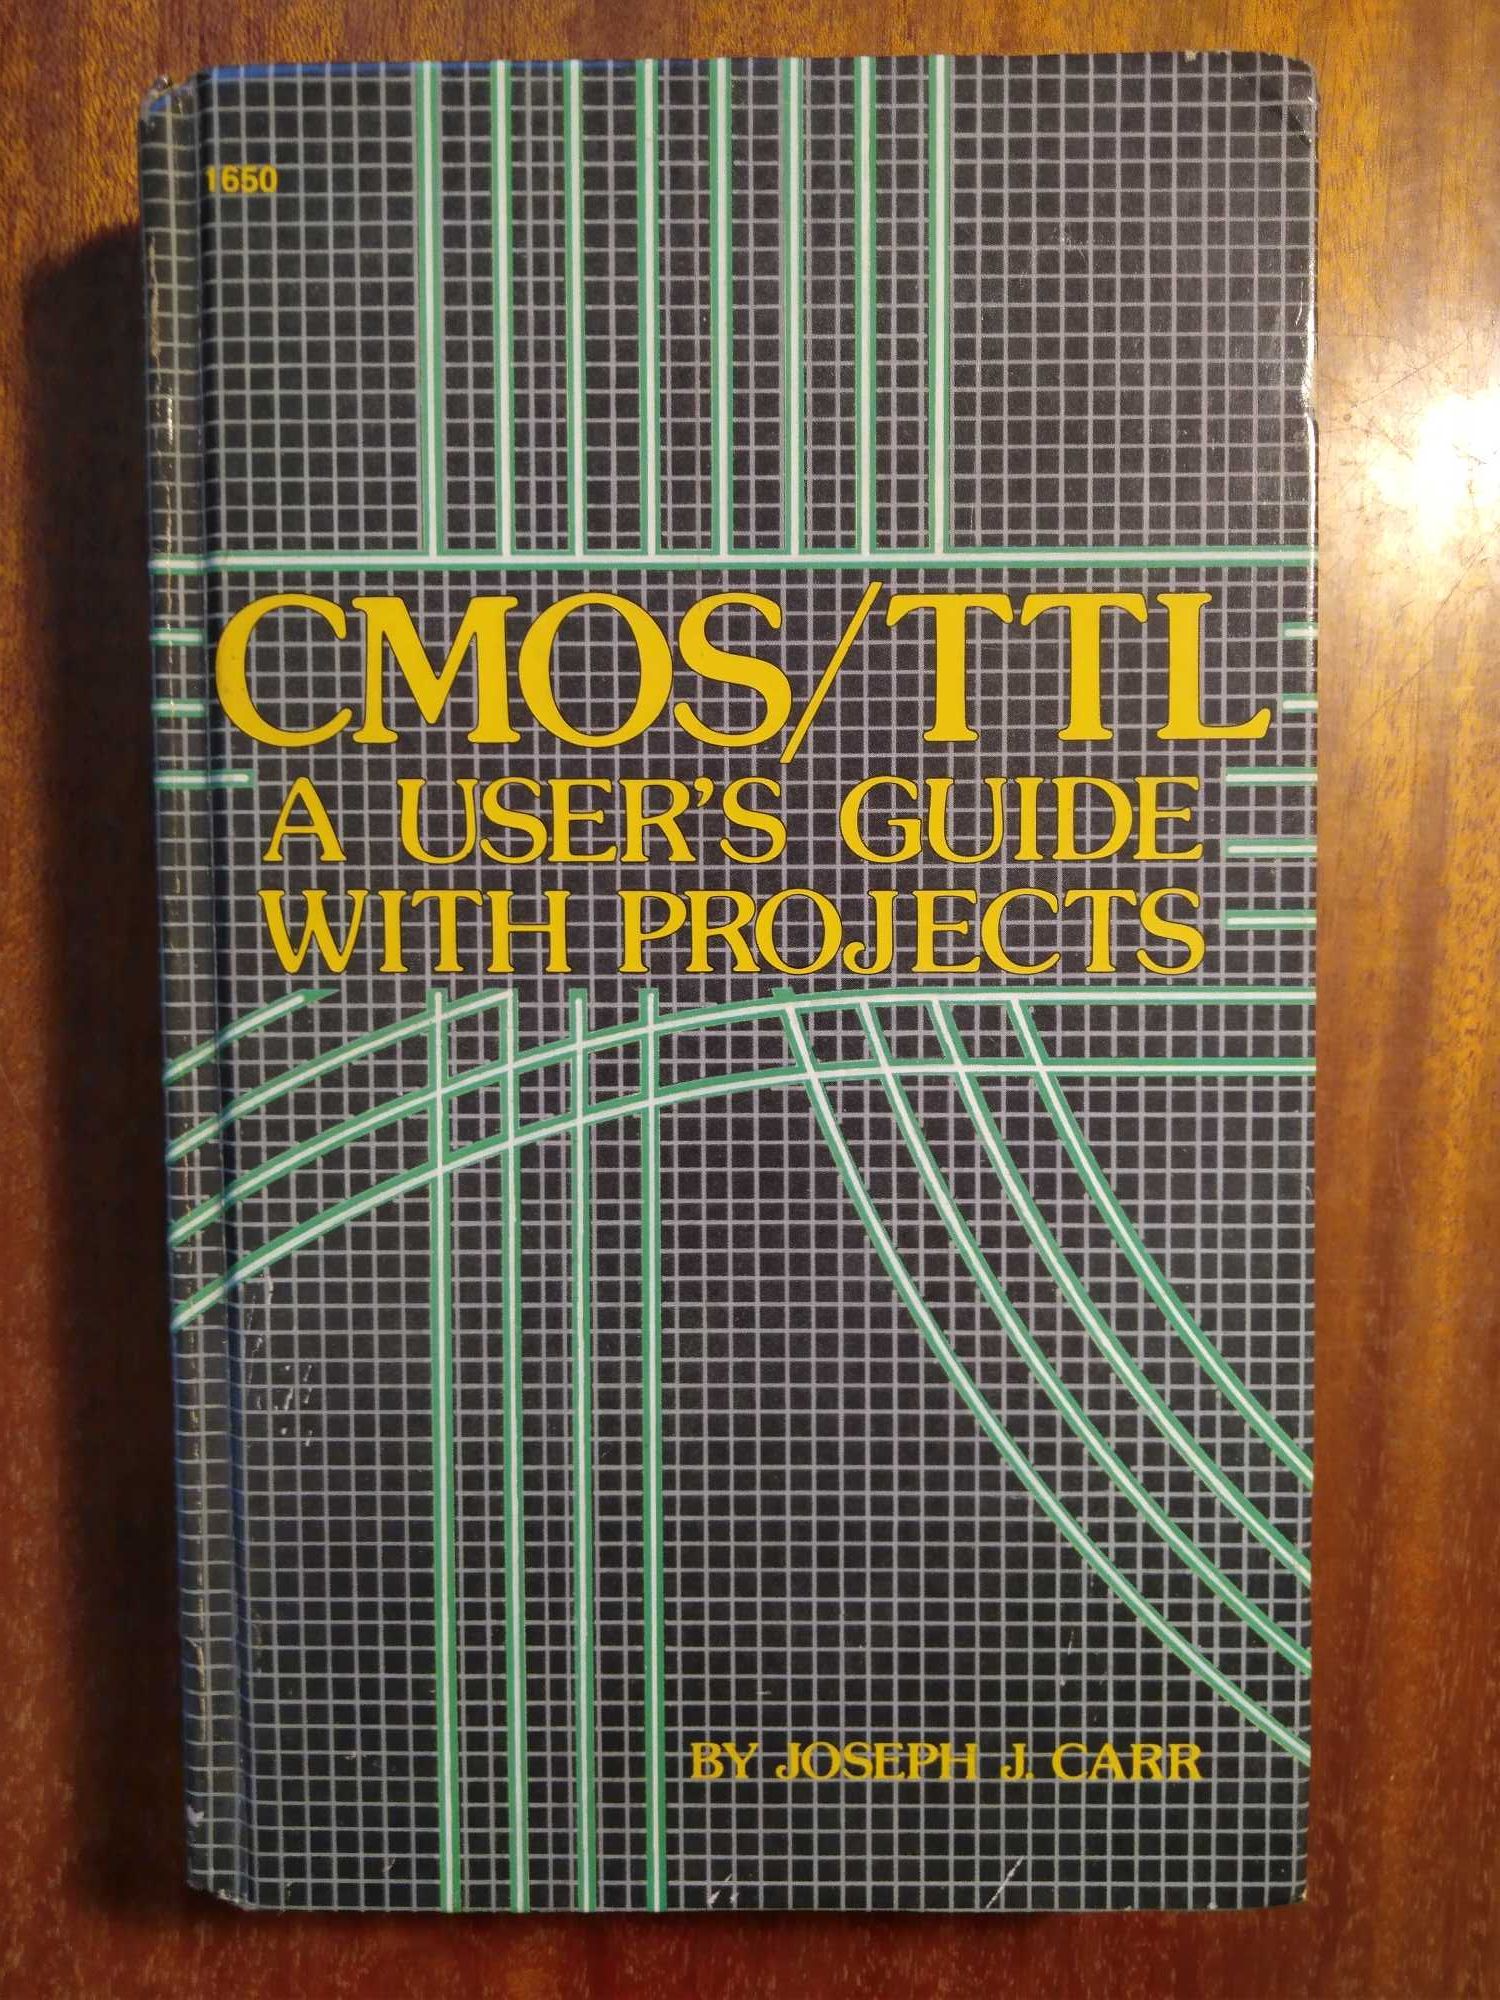 CMOS/TTL - A User's Guide with Projects